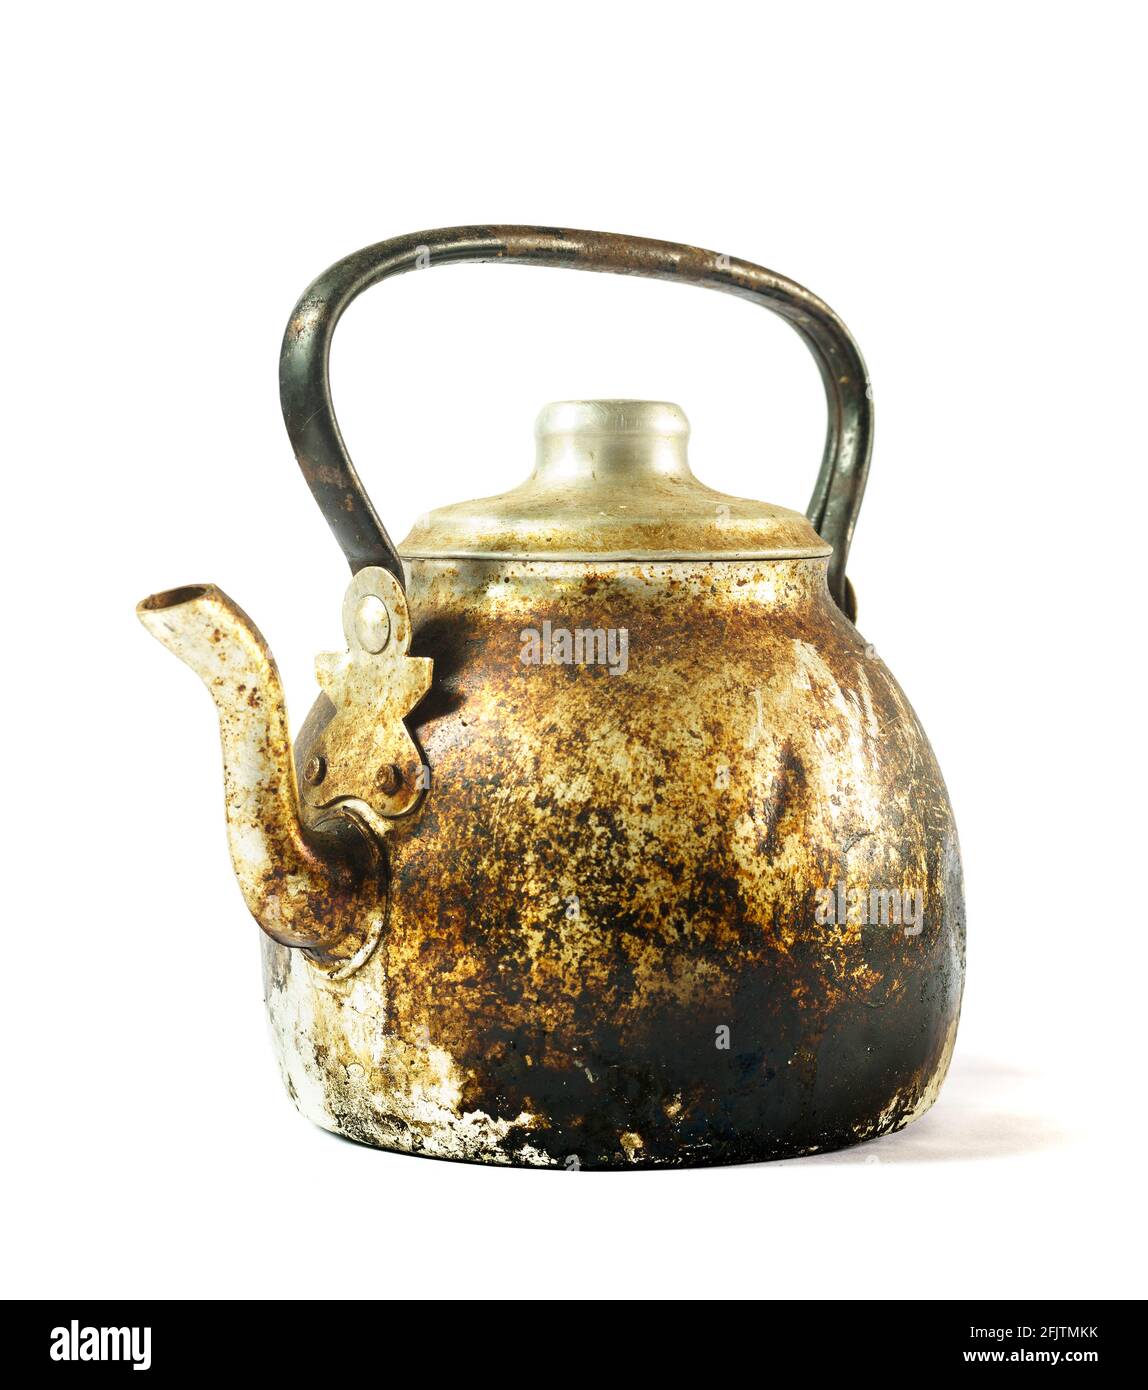 https://c8.alamy.com/comp/2FJTMKK/old-rustic-kettle-with-fire-marks-and-dirt-look-found-in-a-hostel-located-in-samaipata-bolivia-pretty-beaten-and-used-by-the-travelers-2FJTMKK.jpg